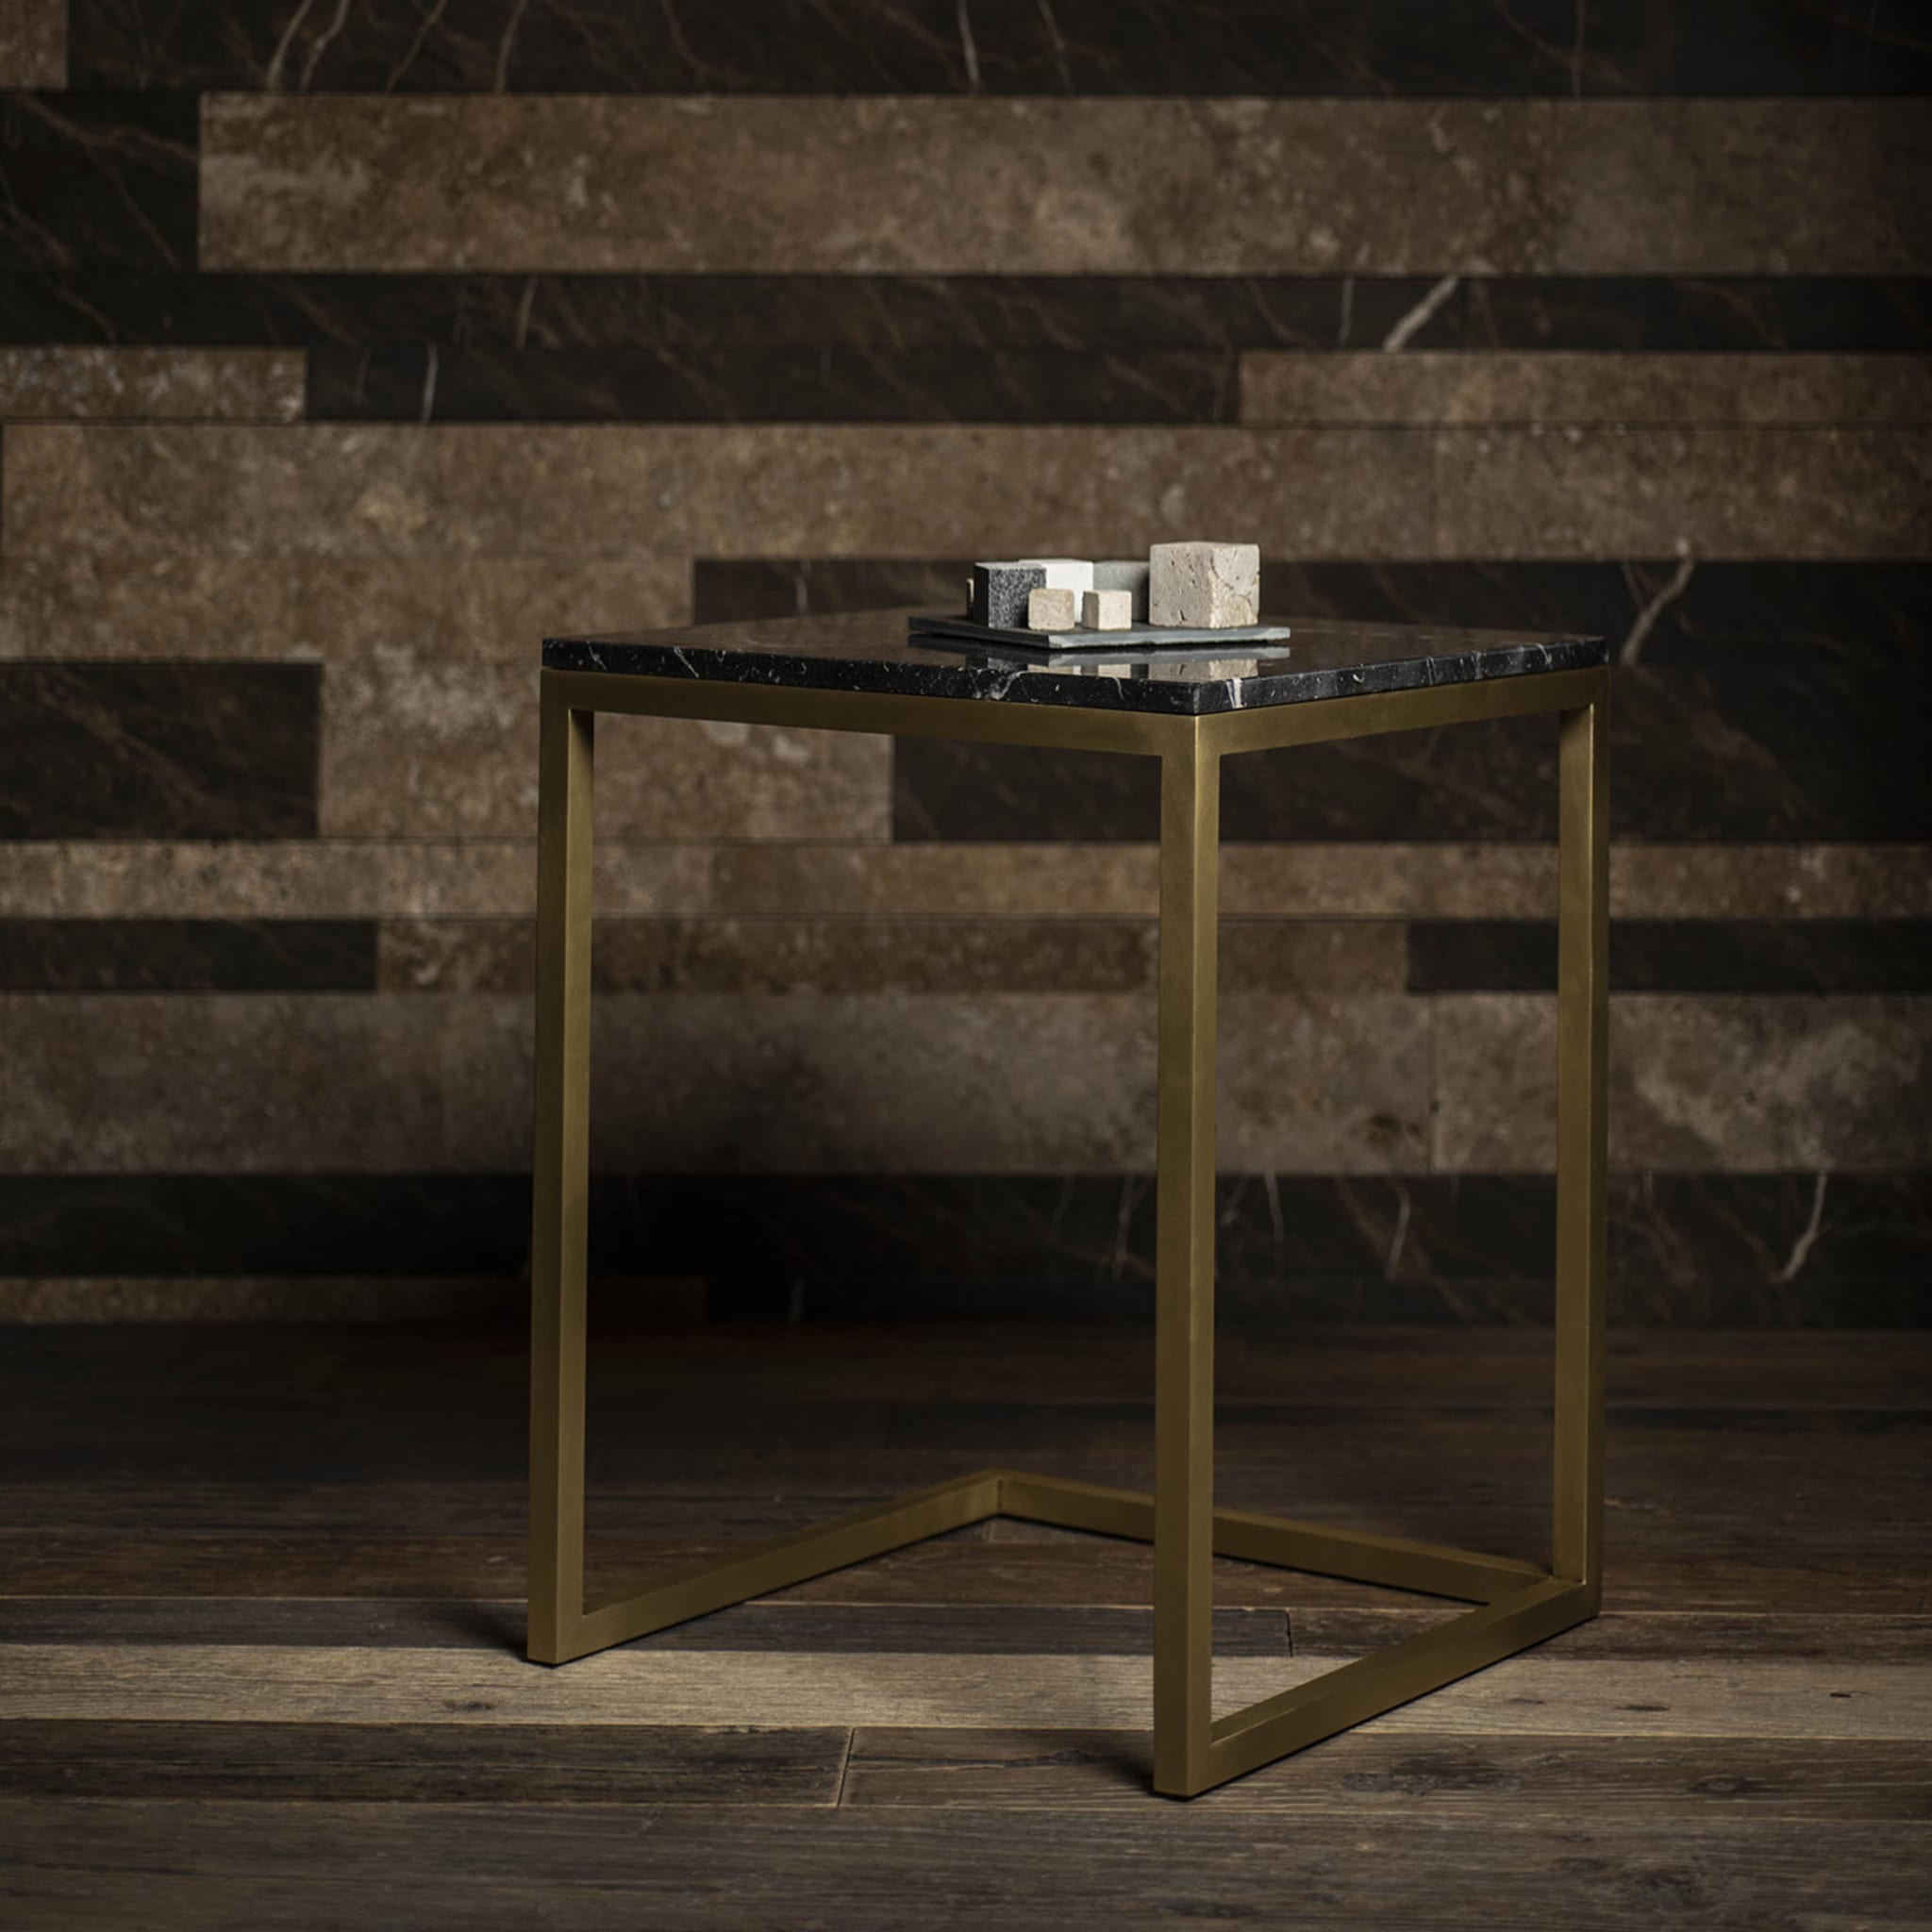 Esopo Brass and Black Marble Side Table by Antonio Saporito - Alternative view 3